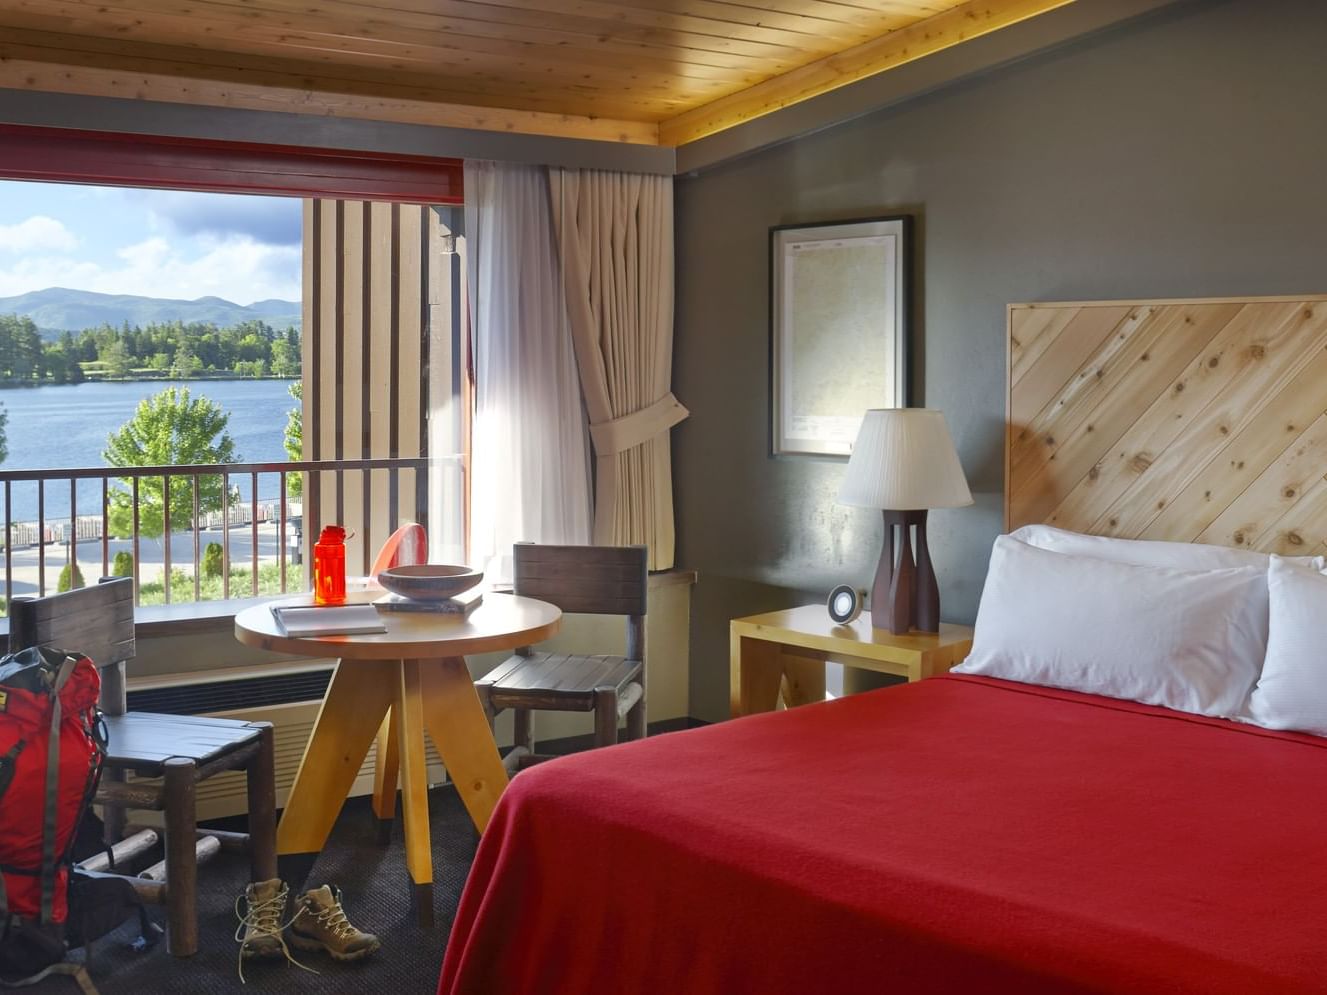 King Room with balcony in Lake House at High Peaks Resort